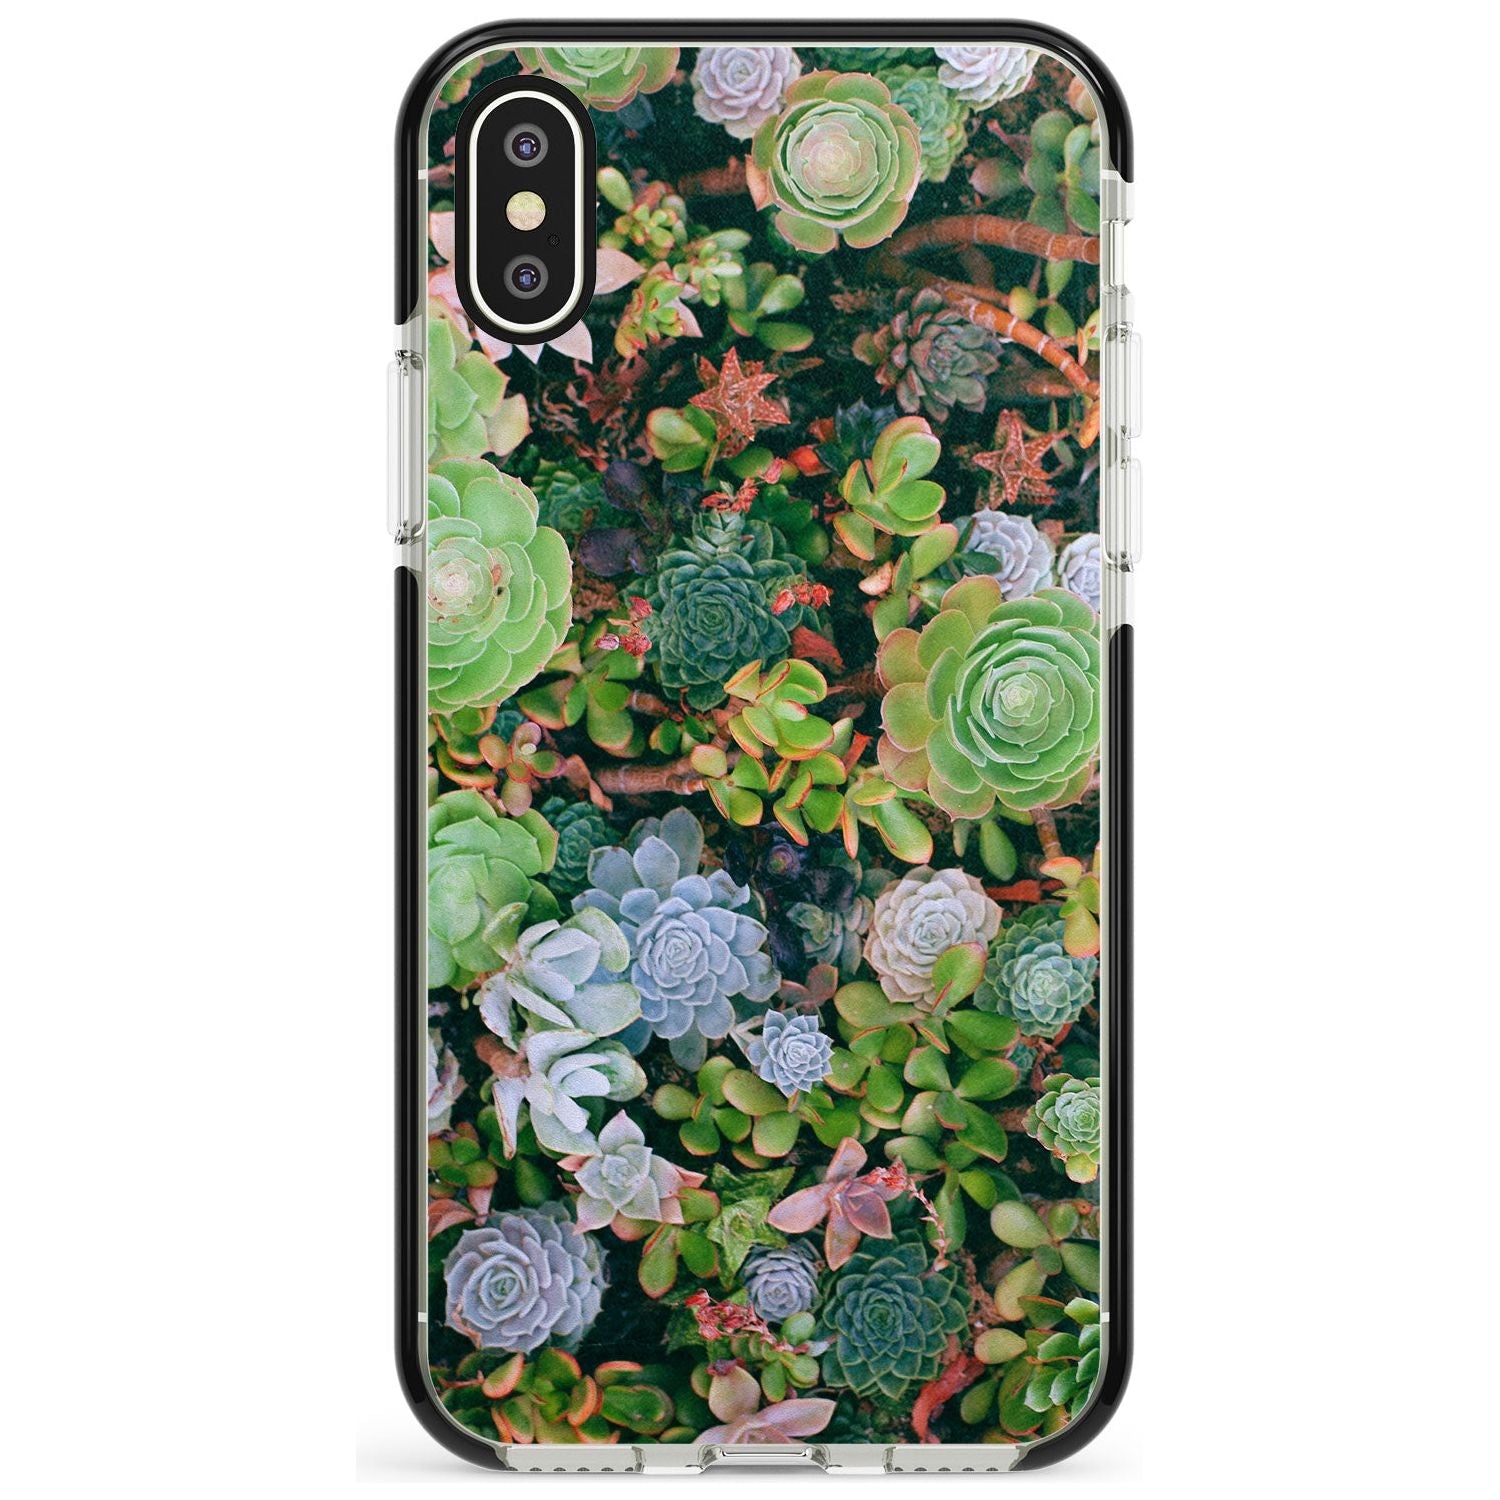 Colourful Succulents Photograph Black Impact Phone Case for iPhone X XS Max XR